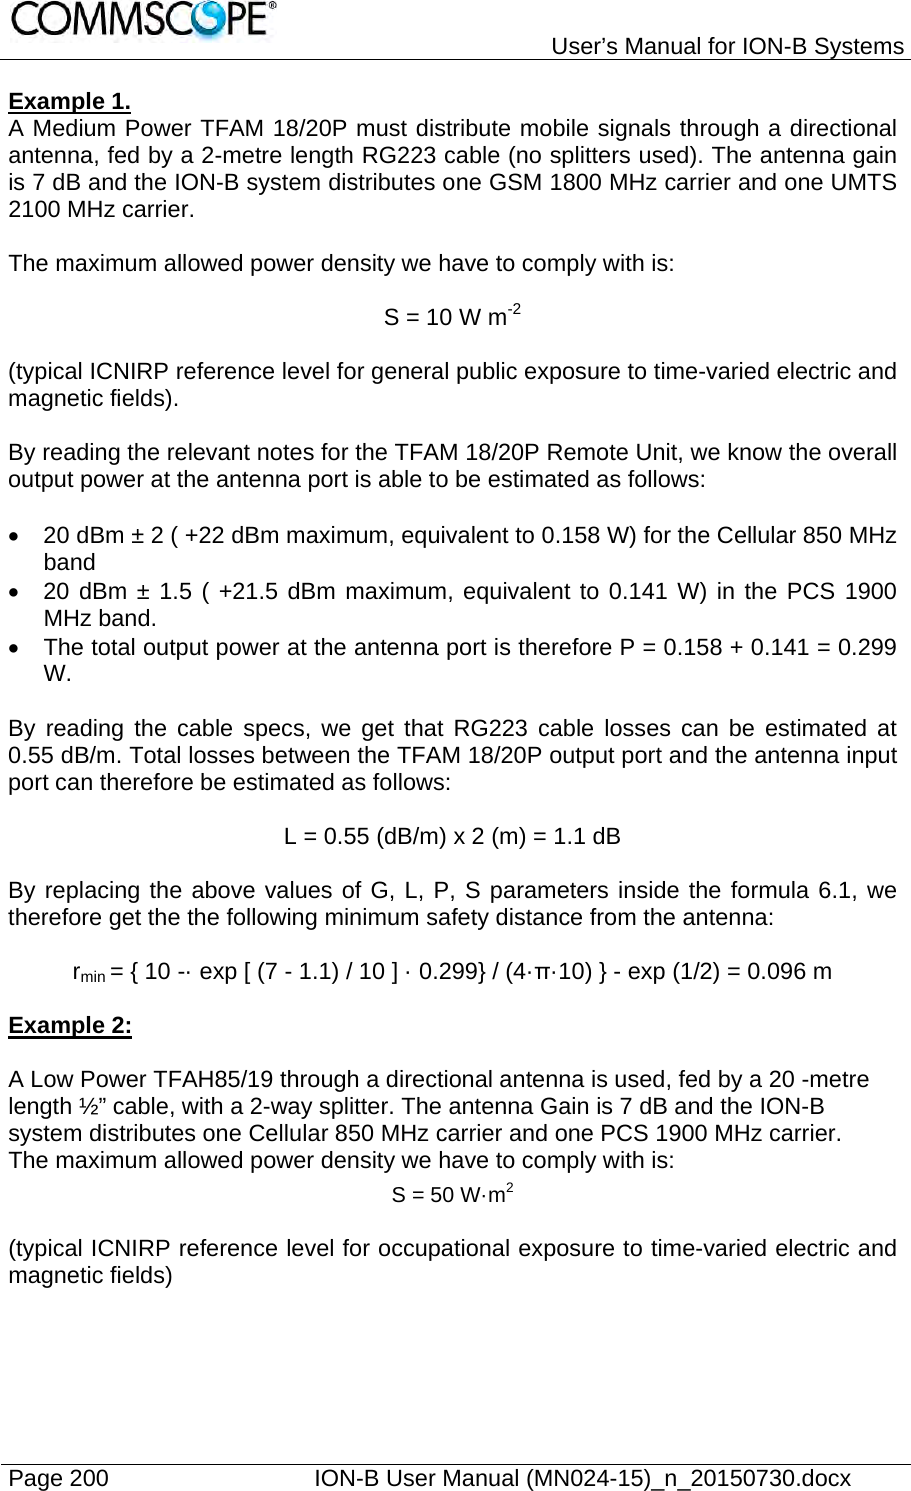   User’s Manual for ION-B Systems Page 200    ION-B User Manual (MN024-15)_n_20150730.docx  Example 1.  A Medium Power TFAM 18/20P must distribute mobile signals through a directional antenna, fed by a 2-metre length RG223 cable (no splitters used). The antenna gain is 7 dB and the ION-B system distributes one GSM 1800 MHz carrier and one UMTS 2100 MHz carrier.  The maximum allowed power density we have to comply with is:  S = 10 W m-2  (typical ICNIRP reference level for general public exposure to time-varied electric and magnetic fields).  By reading the relevant notes for the TFAM 18/20P Remote Unit, we know the overall output power at the antenna port is able to be estimated as follows:    20 dBm ± 2 ( +22 dBm maximum, equivalent to 0.158 W) for the Cellular 850 MHz band   20 dBm ± 1.5 ( +21.5 dBm maximum, equivalent to 0.141 W) in the PCS 1900 MHz band.   The total output power at the antenna port is therefore P = 0.158 + 0.141 = 0.299 W.  By reading the cable specs, we get that RG223 cable losses can be estimated at 0.55 dB/m. Total losses between the TFAM 18/20P output port and the antenna input port can therefore be estimated as follows:  L = 0.55 (dB/m) x 2 (m) = 1.1 dB  By replacing the above values of G, L, P, S parameters inside the formula 6.1, we therefore get the the following minimum safety distance from the antenna:  rmin = { 10 -· exp [ (7 - 1.1) / 10 ] · 0.299} / (4·π·10) } - exp (1/2) = 0.096 m   Example 2:  A Low Power TFAH85/19 through a directional antenna is used, fed by a 20 -metre length ½” cable, with a 2-way splitter. The antenna Gain is 7 dB and the ION-B system distributes one Cellular 850 MHz carrier and one PCS 1900 MHz carrier. The maximum allowed power density we have to comply with is: S = 50 W·m2  (typical ICNIRP reference level for occupational exposure to time-varied electric and magnetic fields)  